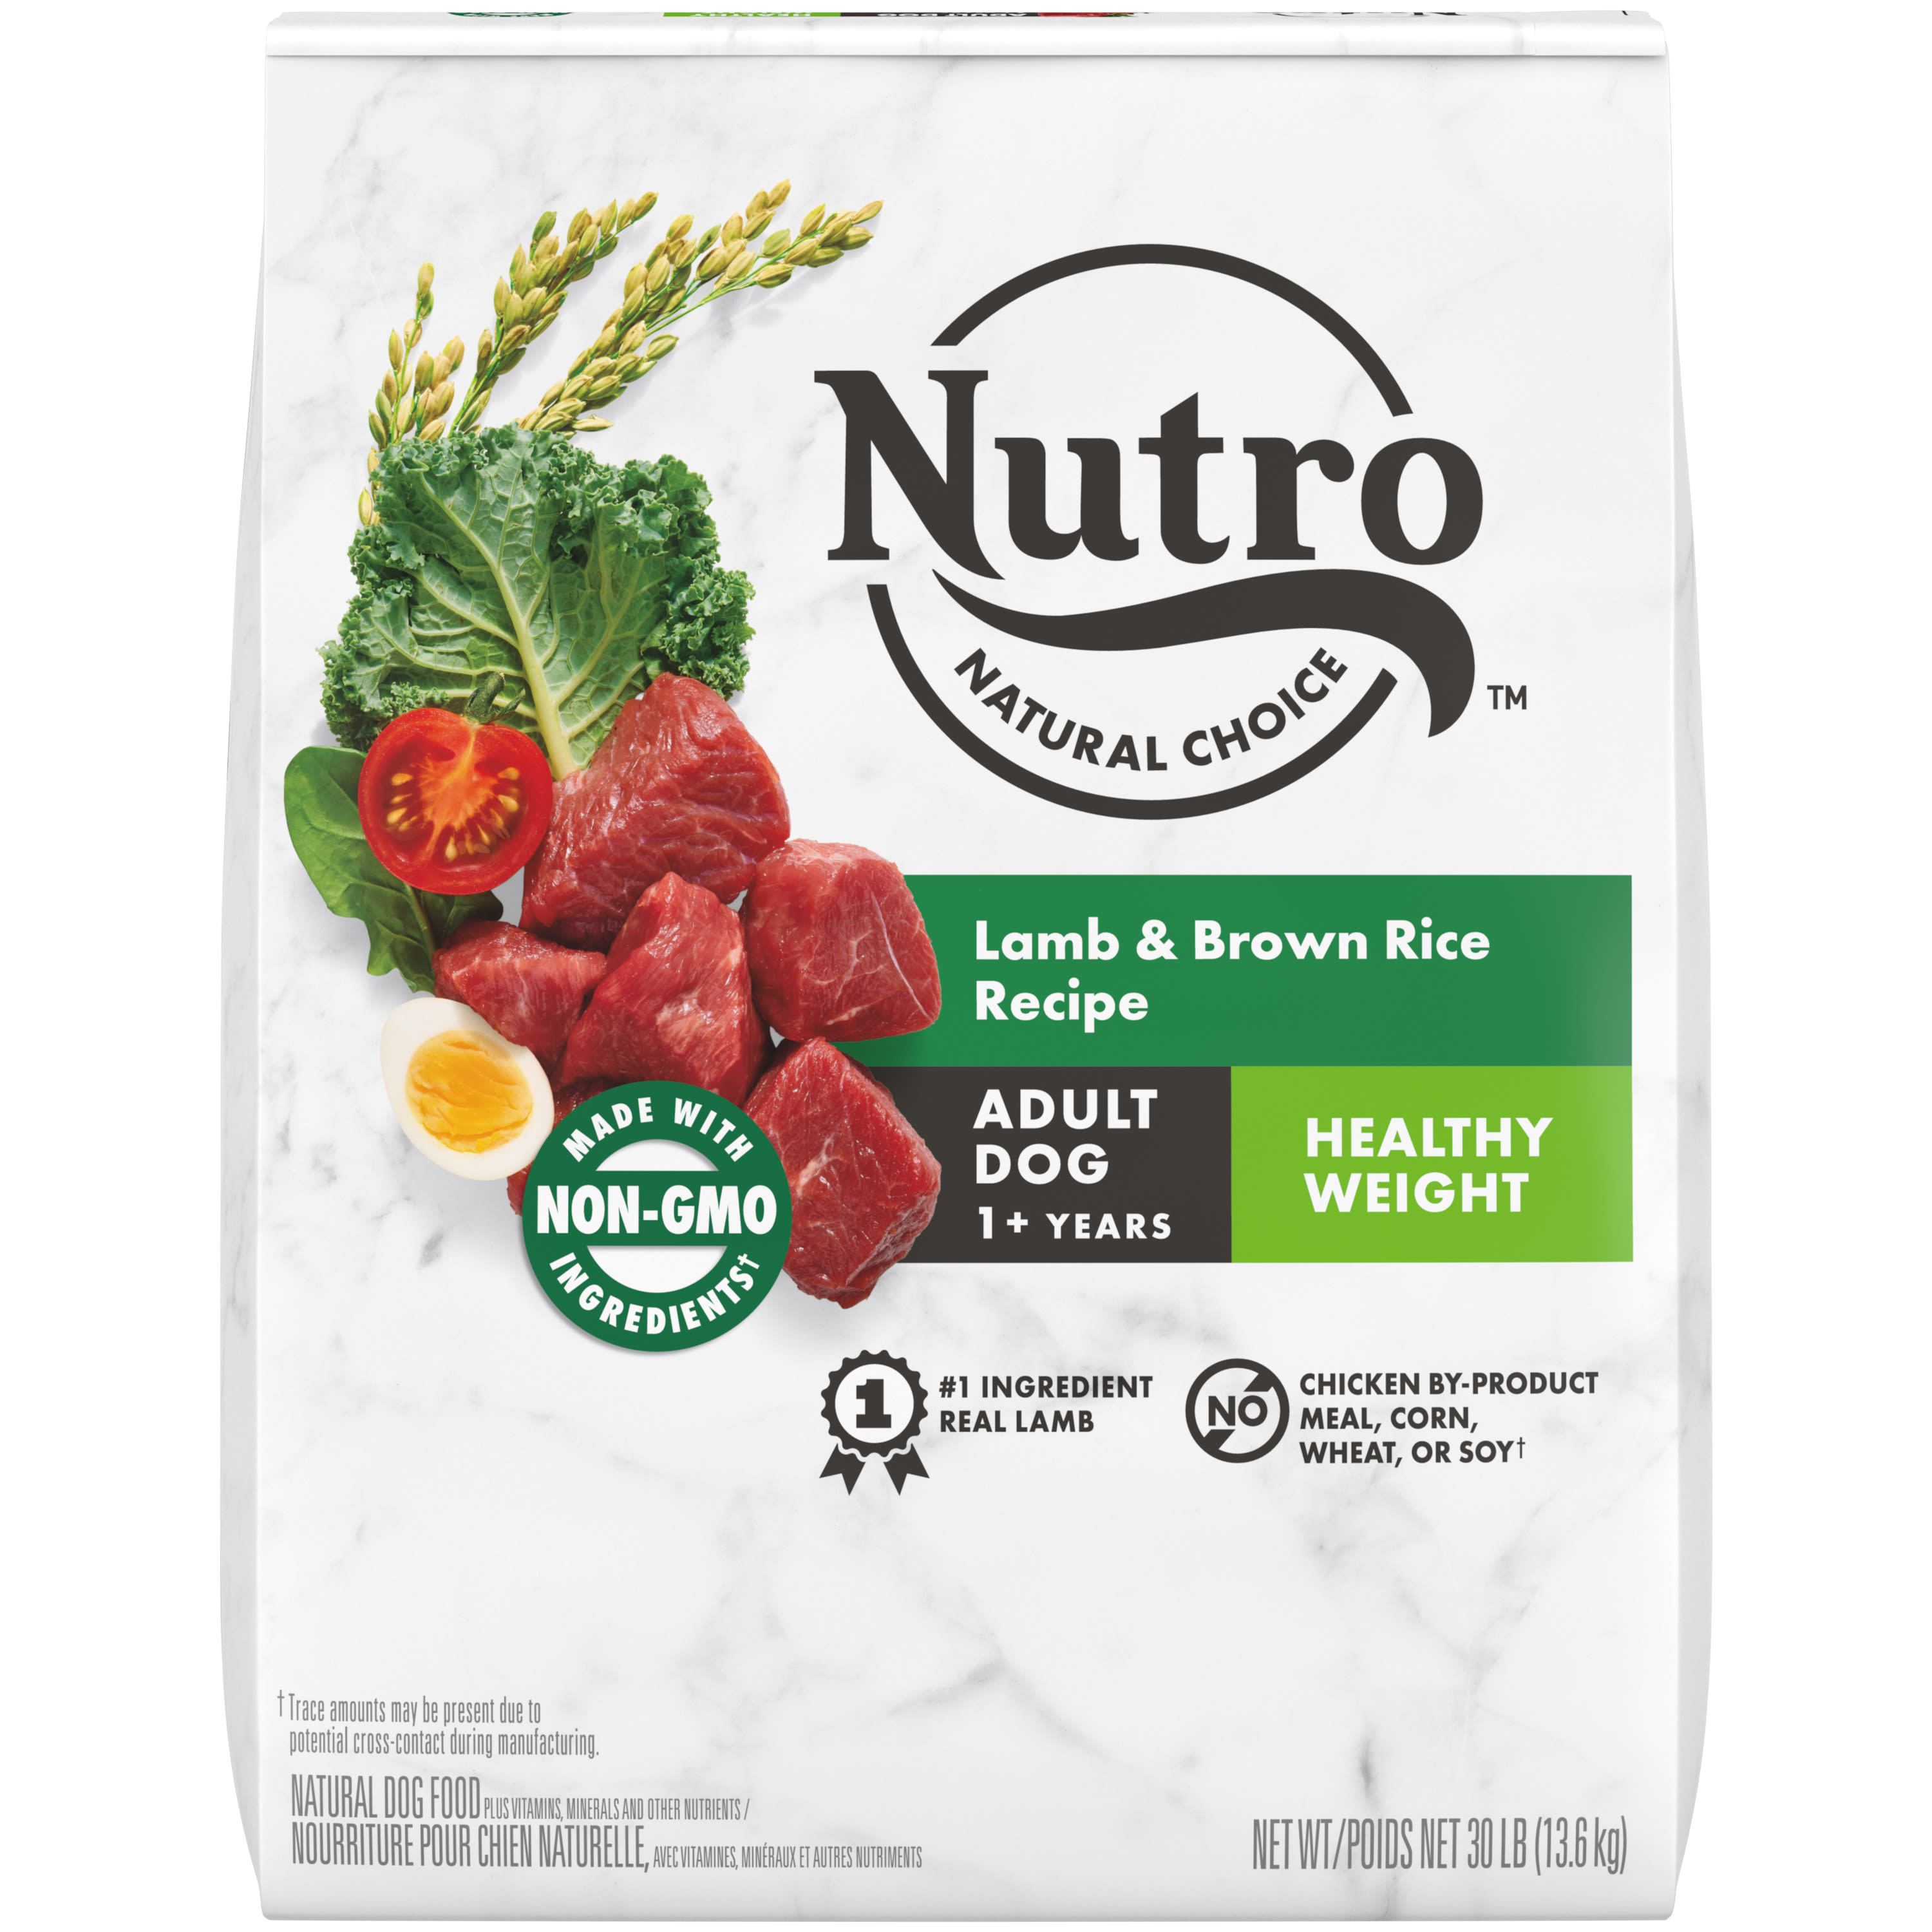 Nutro Natural Choice Lamb & Brown Rice, Dry Dog Food for Healthy Weight Adult Dog, 30 lb. Bag - image 3 of 13